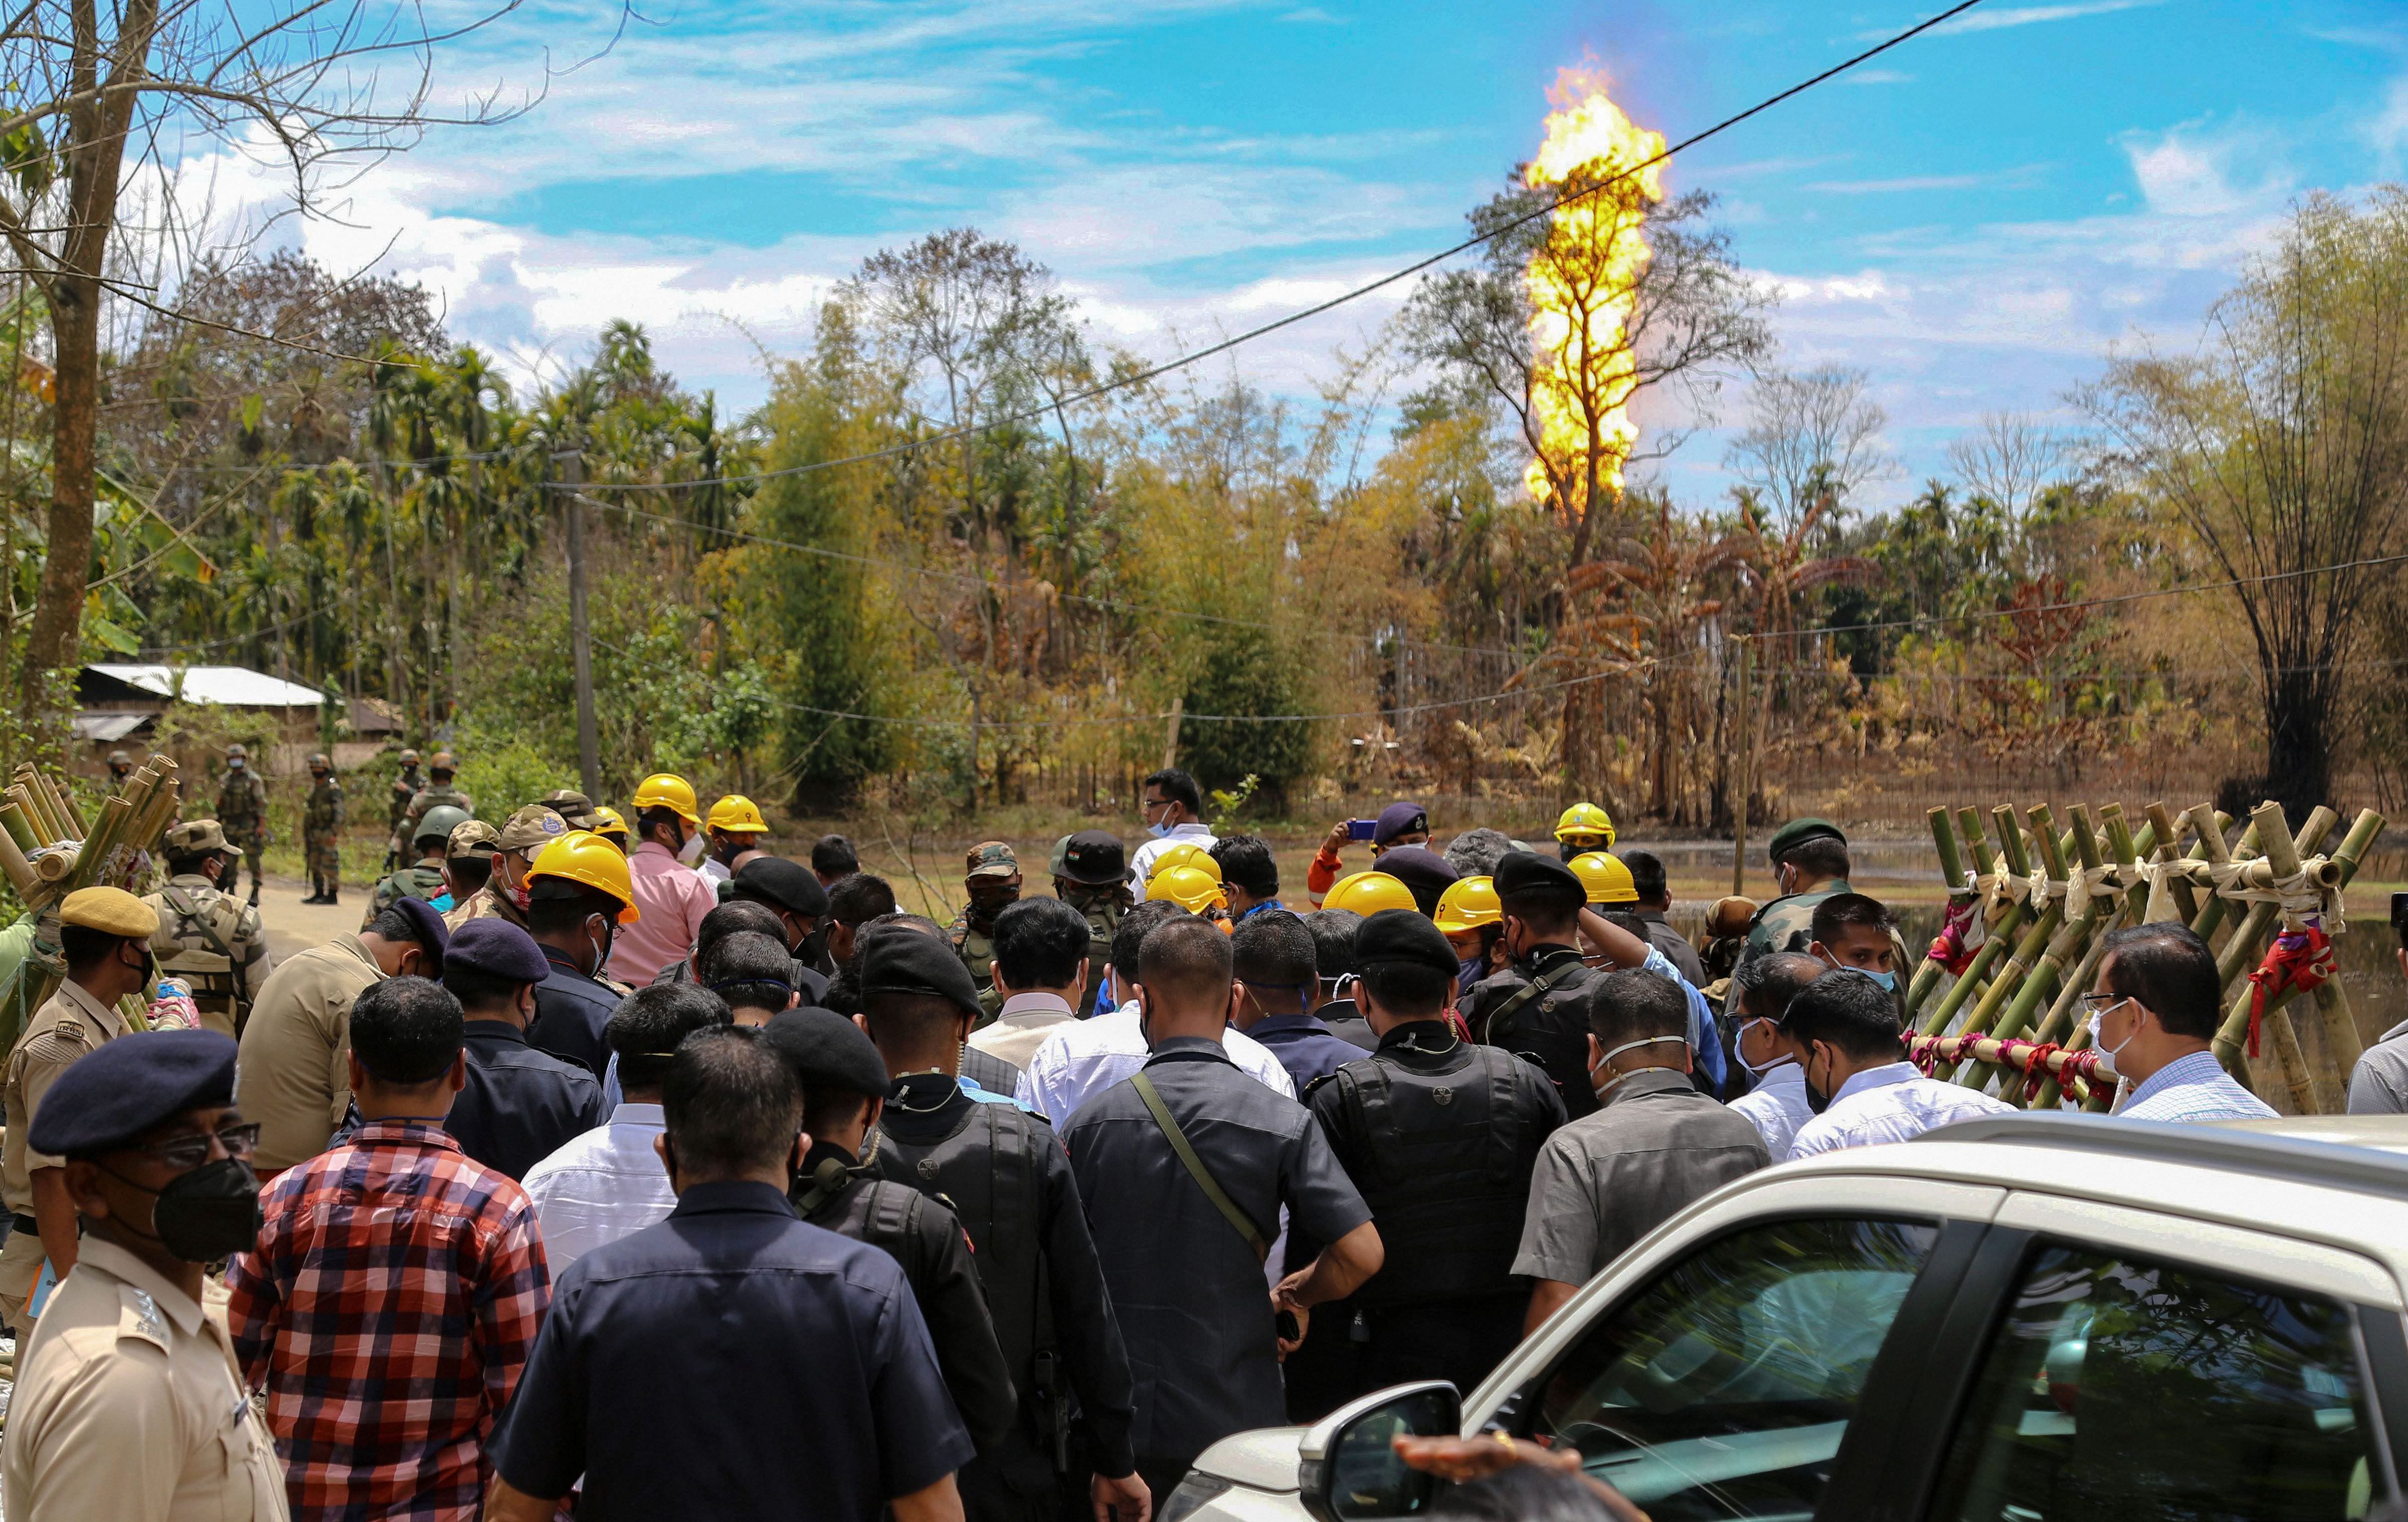 Assam Chief Minister Sarbananda Sonowal and Union Petroleum Minister Dharmendra Pradhan take stock of measures taken by experts to douse fire at Baghjan gas well site, in Tinsukia District, Sunday, June 14, 2020. (PTI Photo)